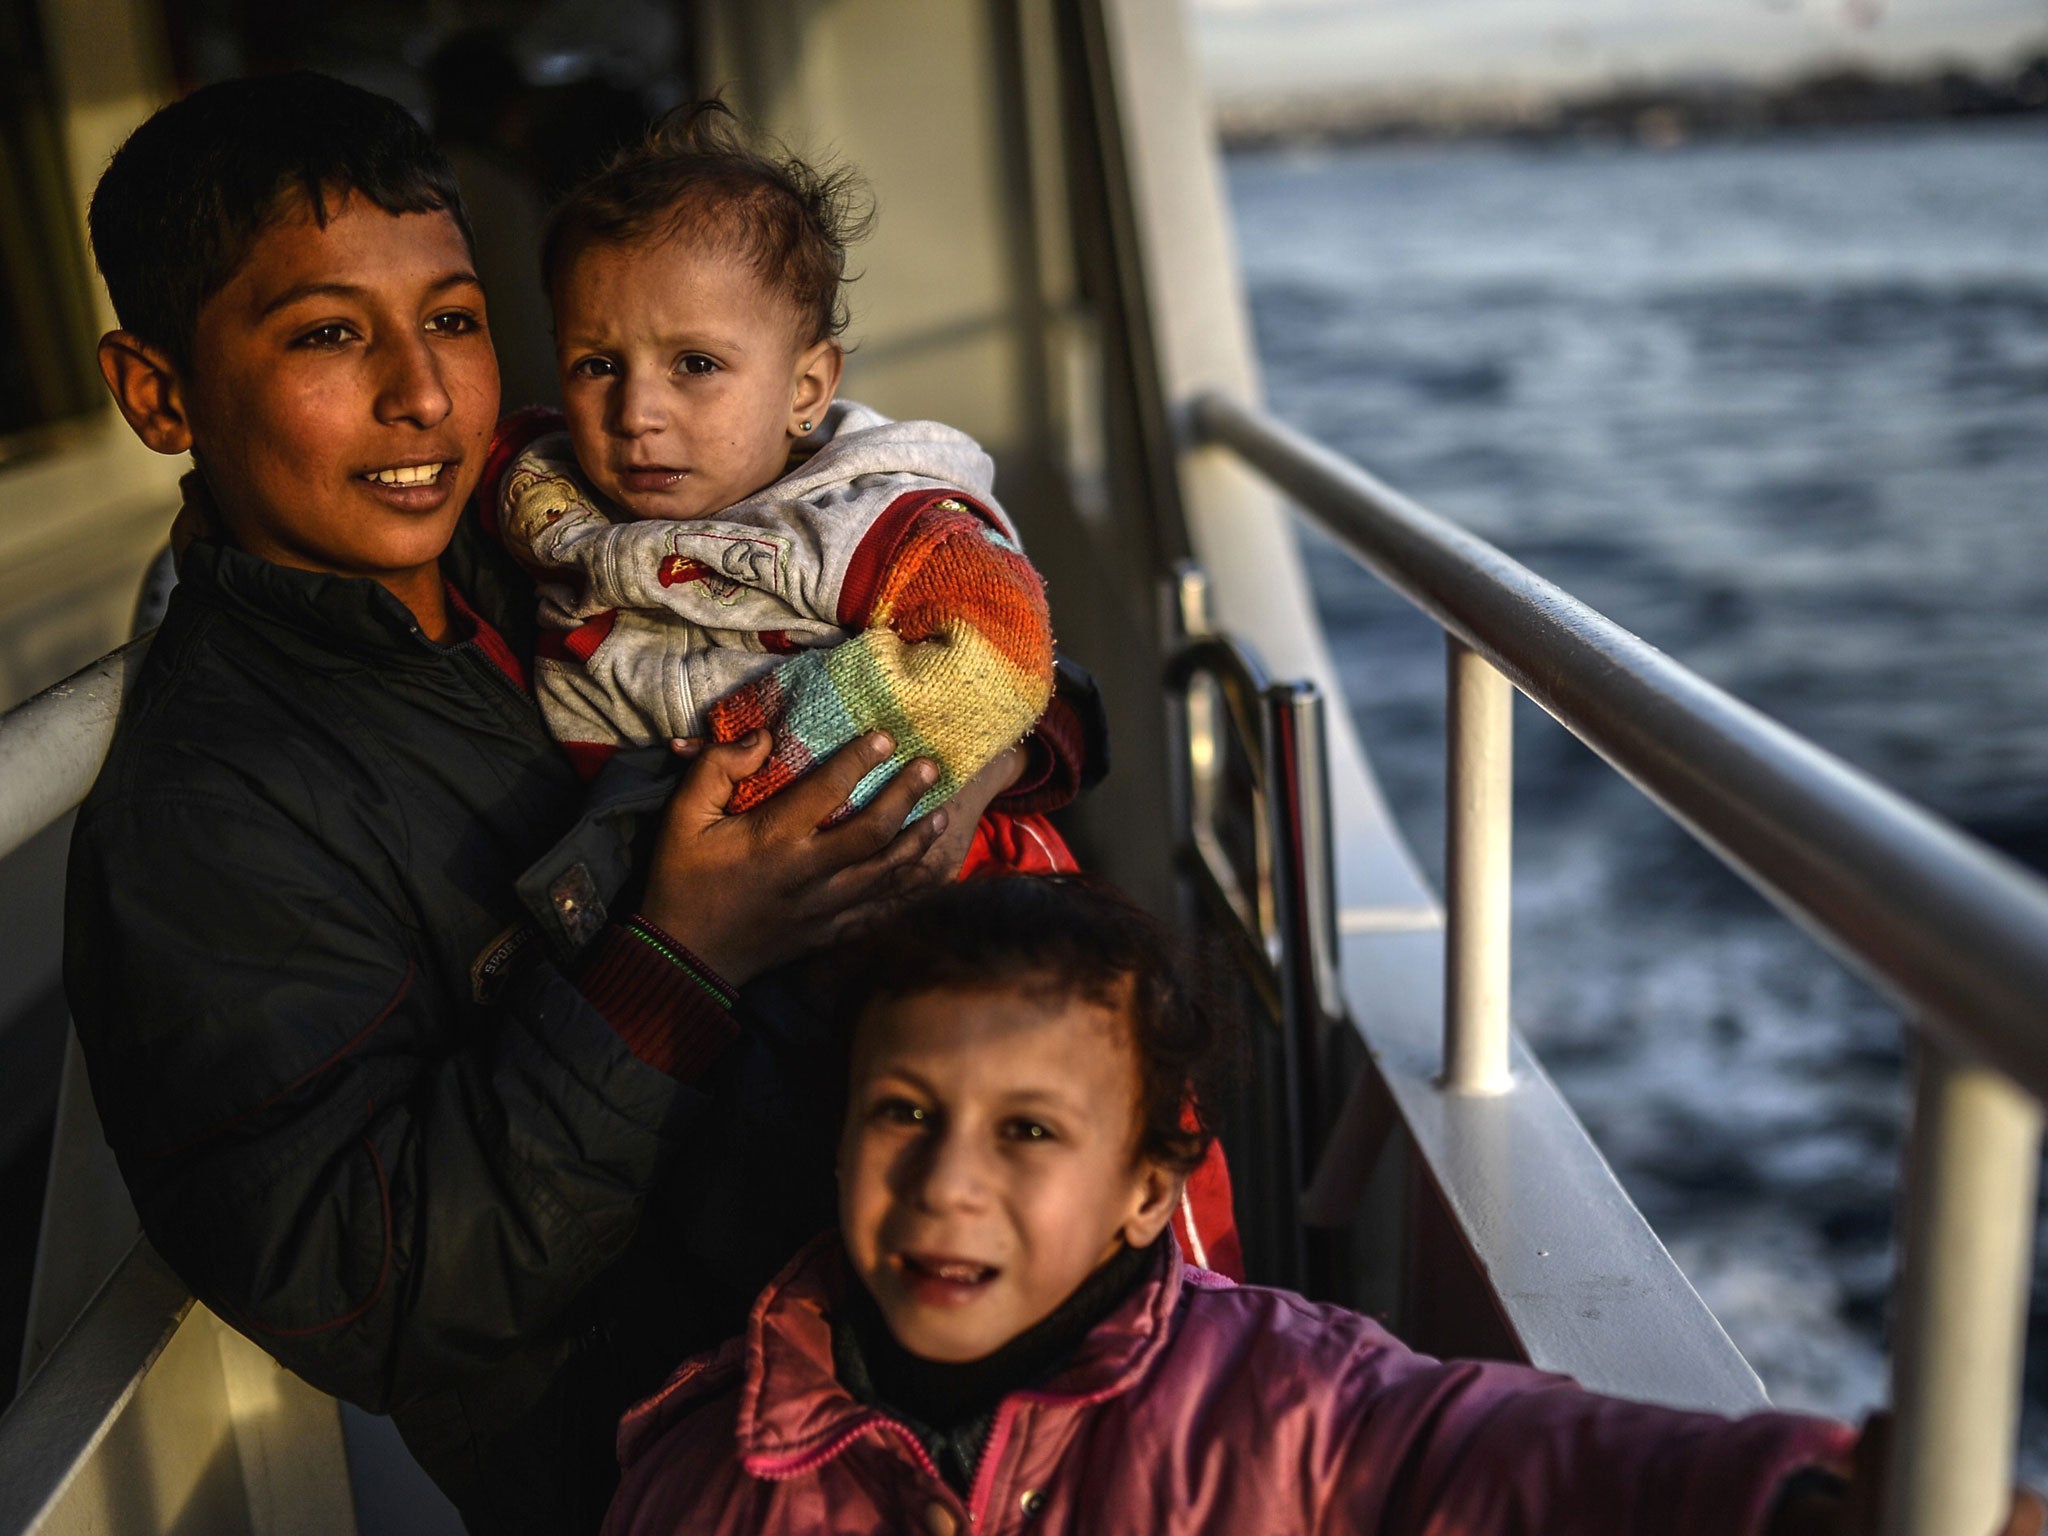 A Syrian refugee family from Aleppo crosses the Bosphorus from Uskudar to the European side of Istanbul